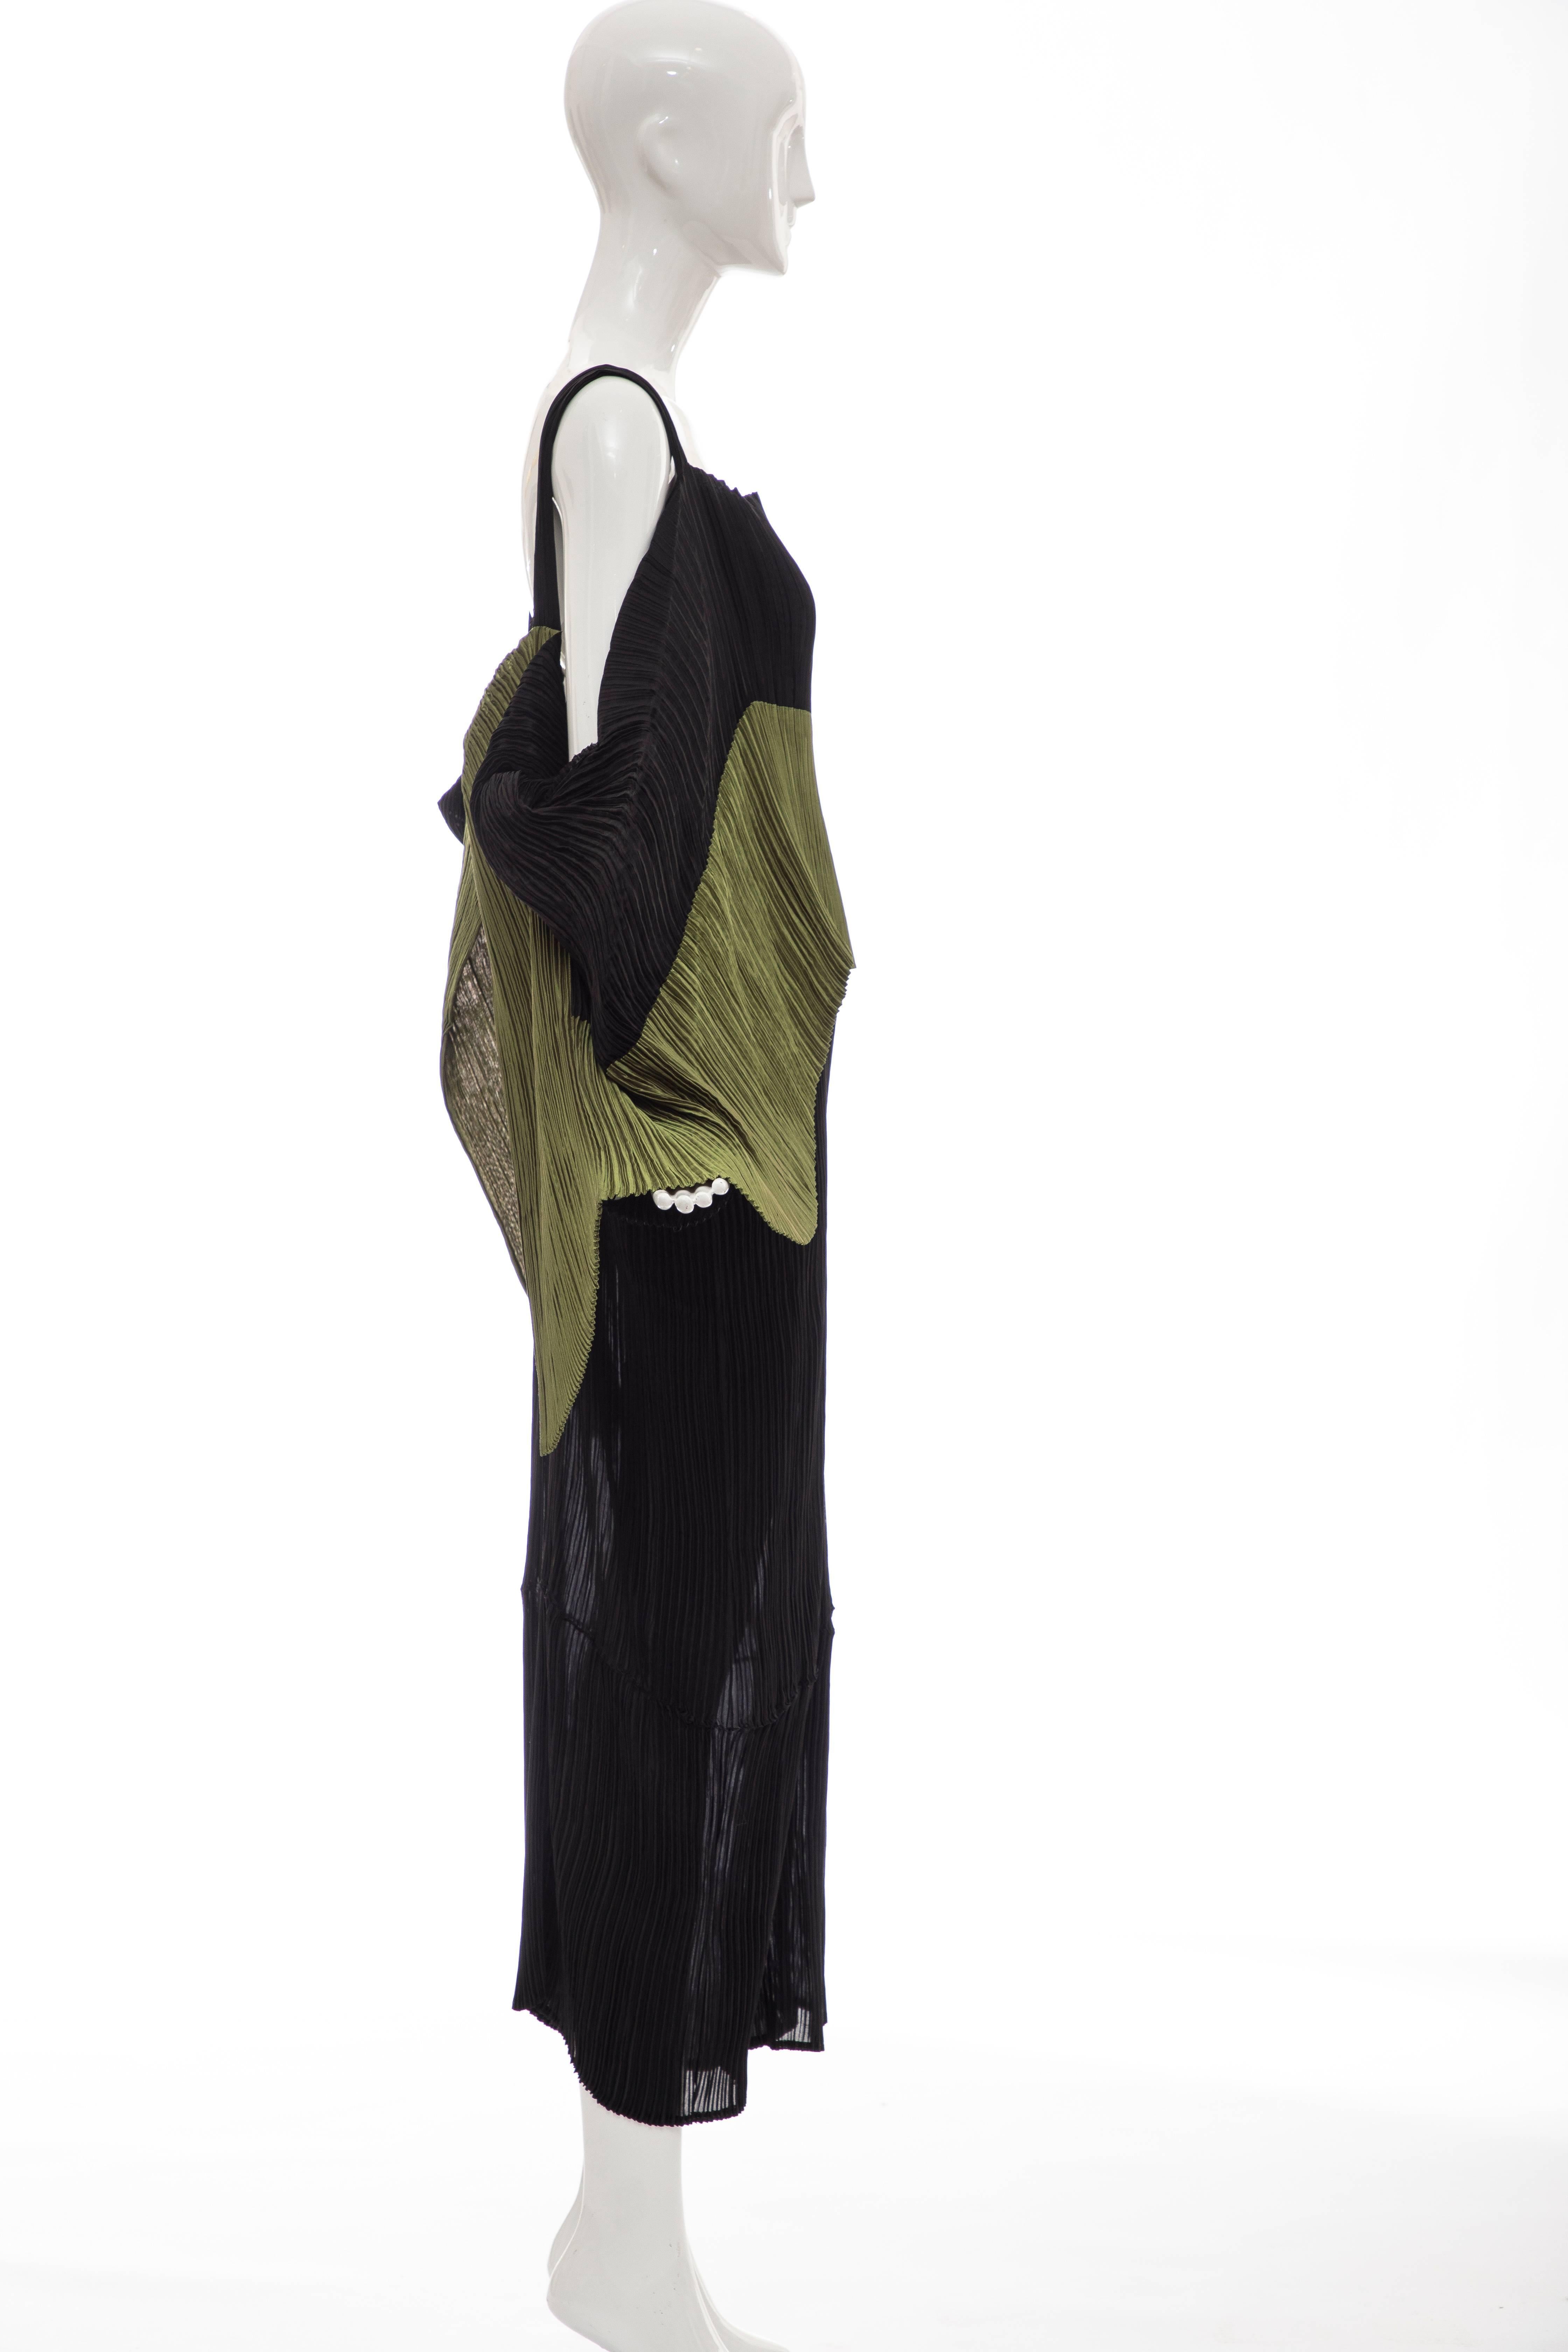 Women's Issey Miyake Black Pleated Dress With Olive Green Panel At Bodice, Circa 1990s